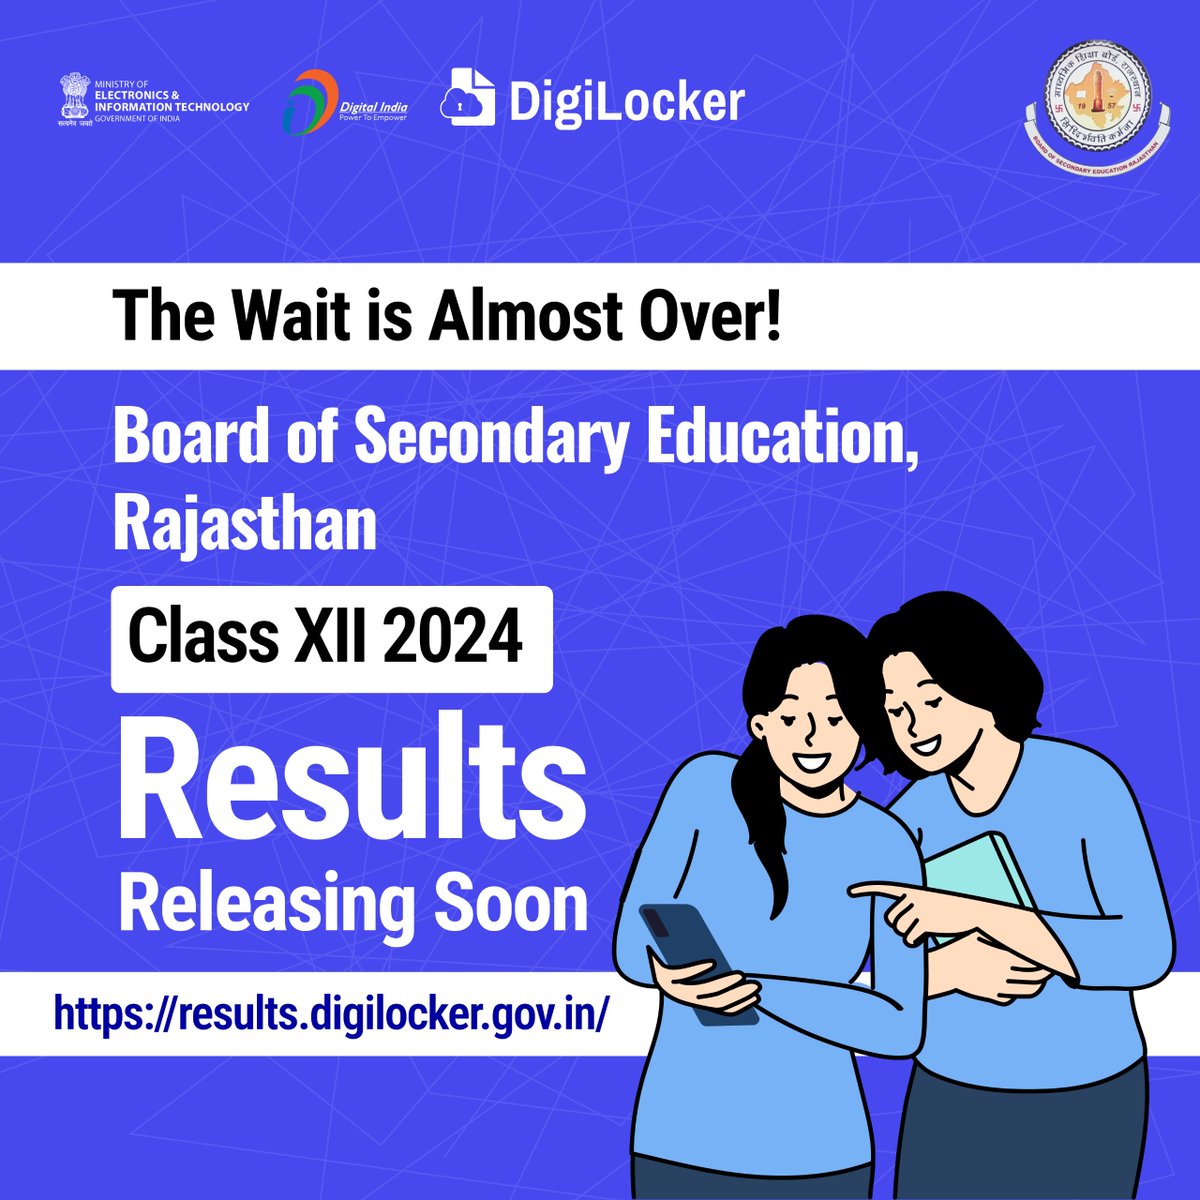 Board of Secondary Education, Rajasthan, class XII 2024 results are releasing soon. Check your results at results.digilocker.gov.in. Stay tuned for more updates.
#RBSEResults2024 #Rajasthan #BoardResult #RBSE